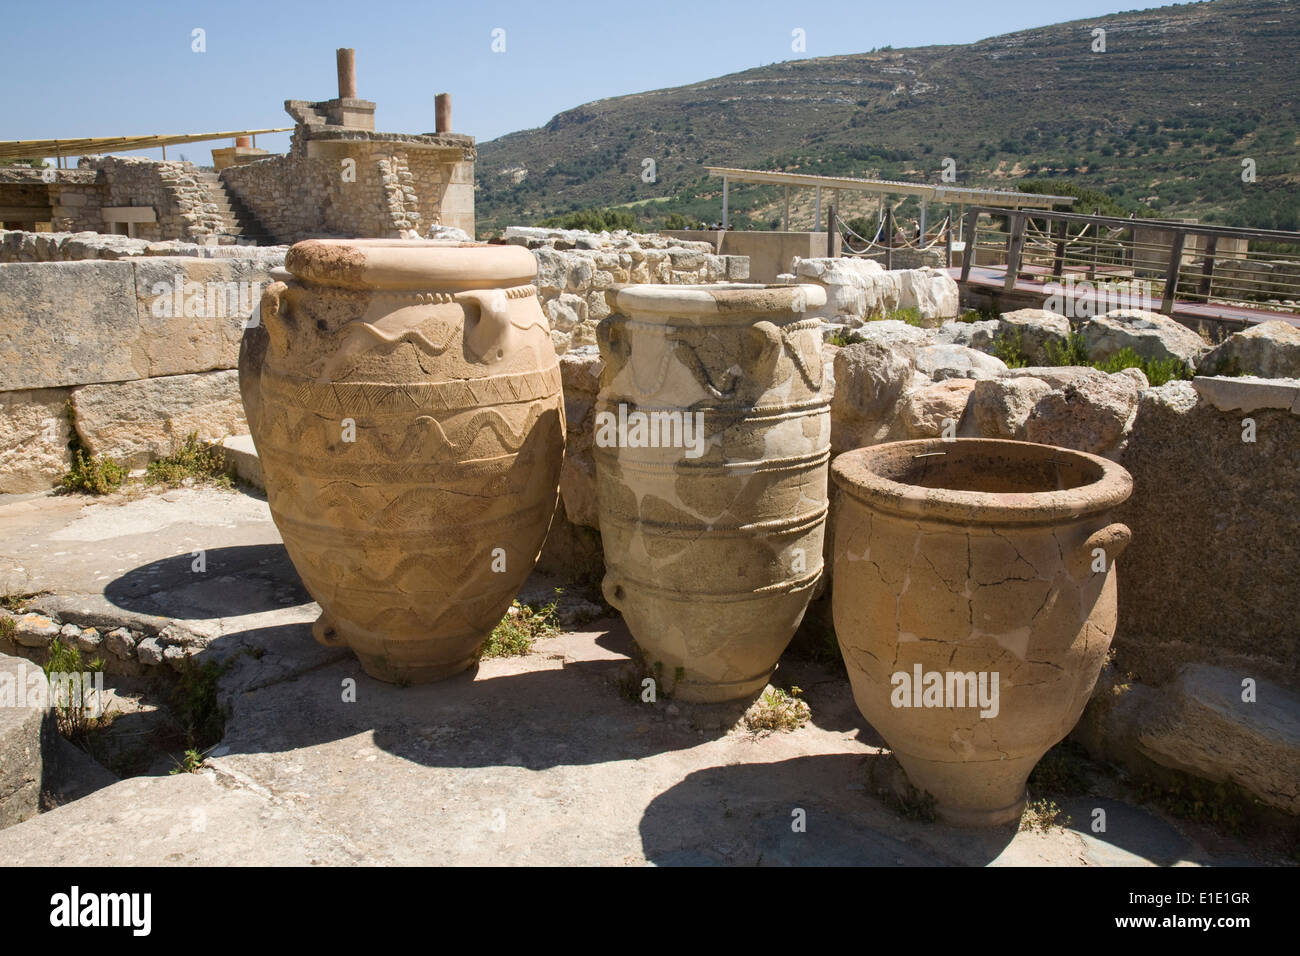 Earthenware pots on show in Knossos, Crete. Stock Photo